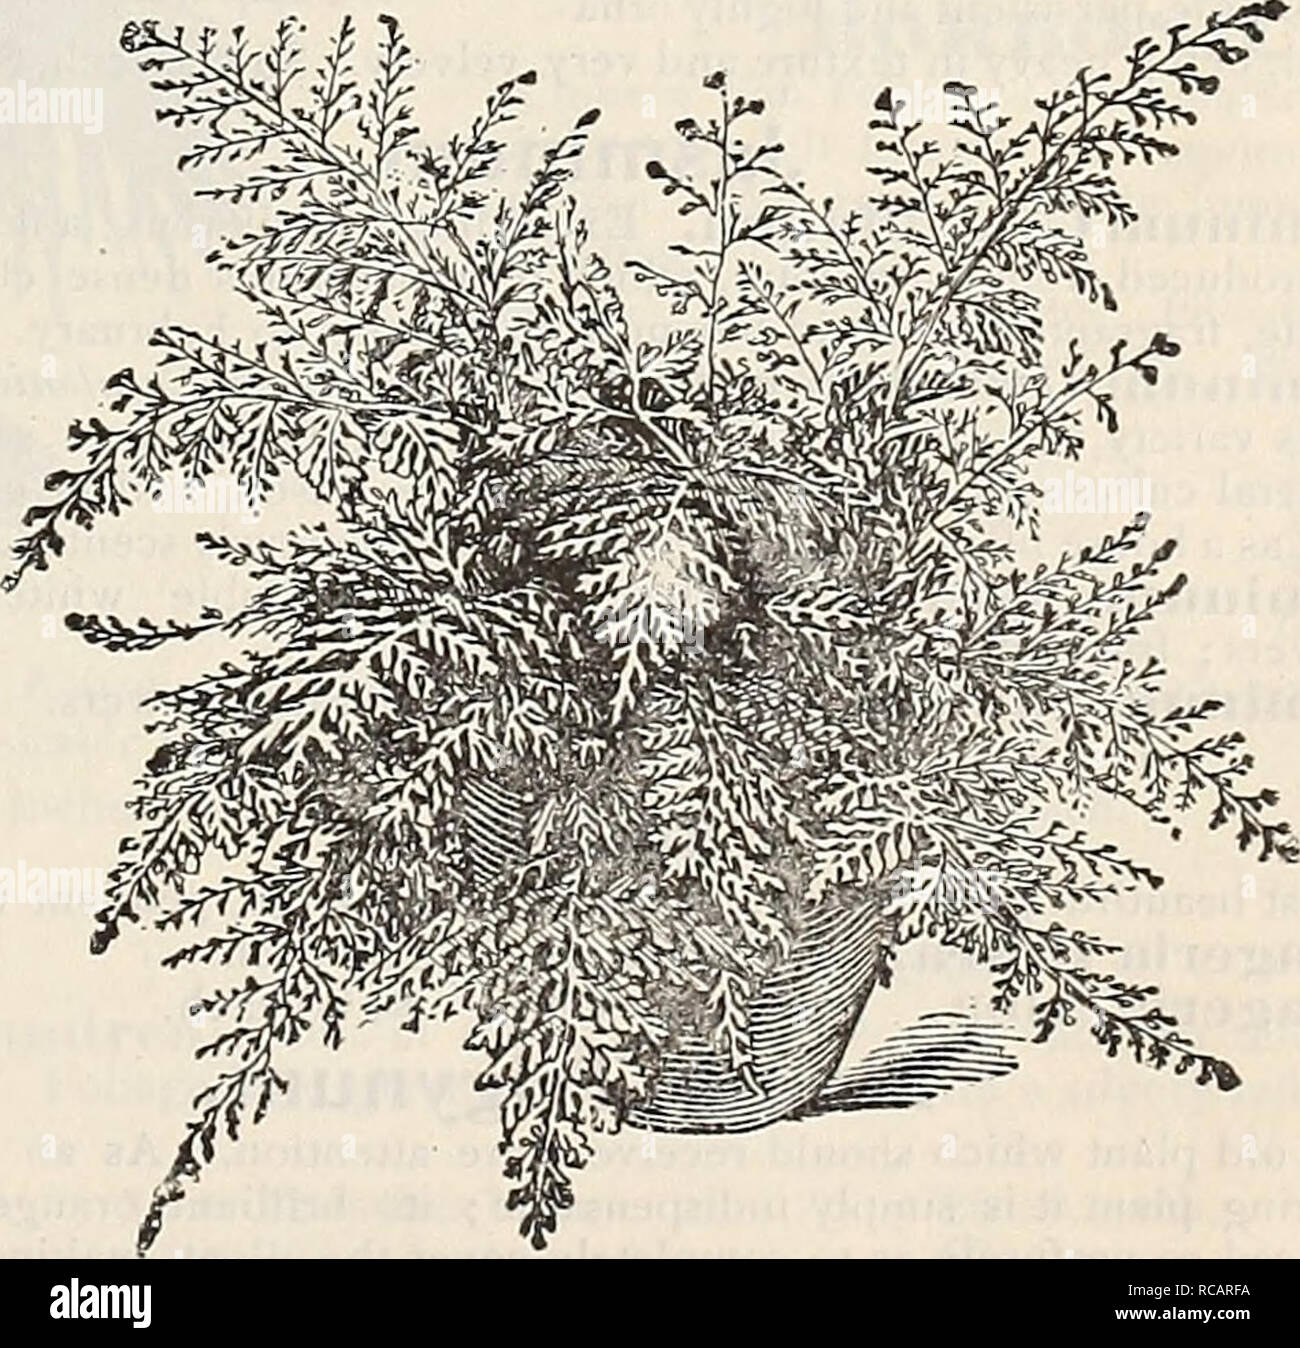 . Dreer's autumn catalogue : 1896 bulbs, plants, seeds. Bulbs (Plants) Catalogs; Flowers Seeds Catalogs; Gardening Equipment and supplies Catalogs; Nurseries (Horticulture) Catalogs; Fruit Seeds Catalogs. Microlepia Hirta Cristata. Pteris Argyrea. One of the most useful Ferns for all purposes; large, bold foliage, with broad band of white through the center of each frond. 15 and 25 cts. each. P. Cretica Albo Lineata. A pretty, dwarf, variagated variety. 15 cts. each. P. Ouratlii. A strong-growing variety of a compact habit, with dark green fronds of easy culture. 15 to 25 cts. each. P. Tremula Stock Photo